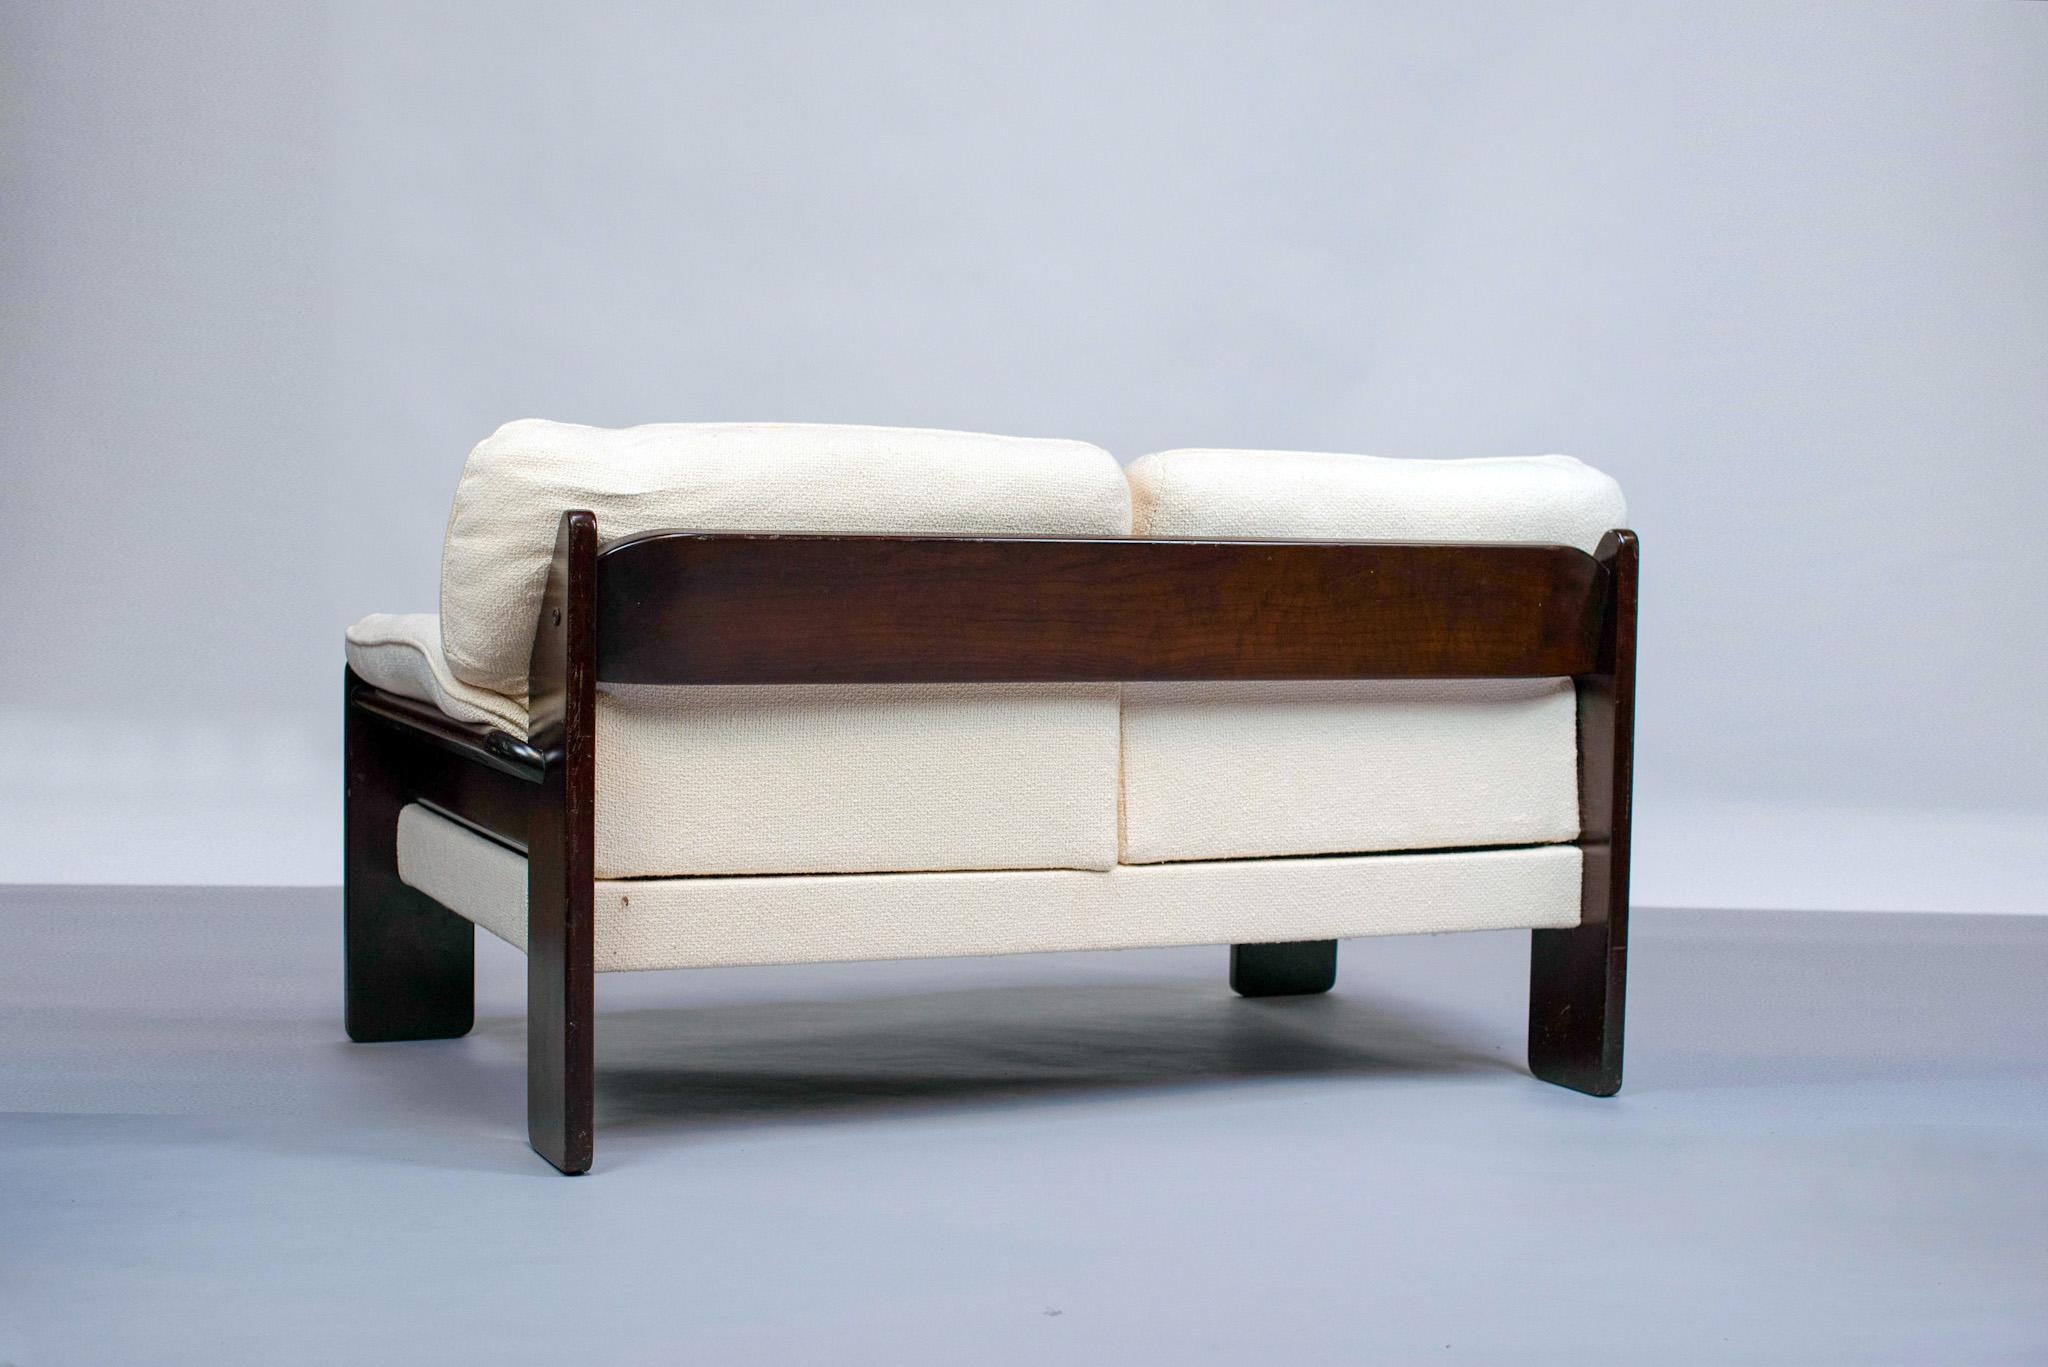 The 2-seater sofa designed by Brazilian designer Jean Gillon is an elegant and comfortable piece. It consists of a solid wood frame, covered with a white cotton curly fabric. The fabric is flexible and soft to the touch, offering an exceptional